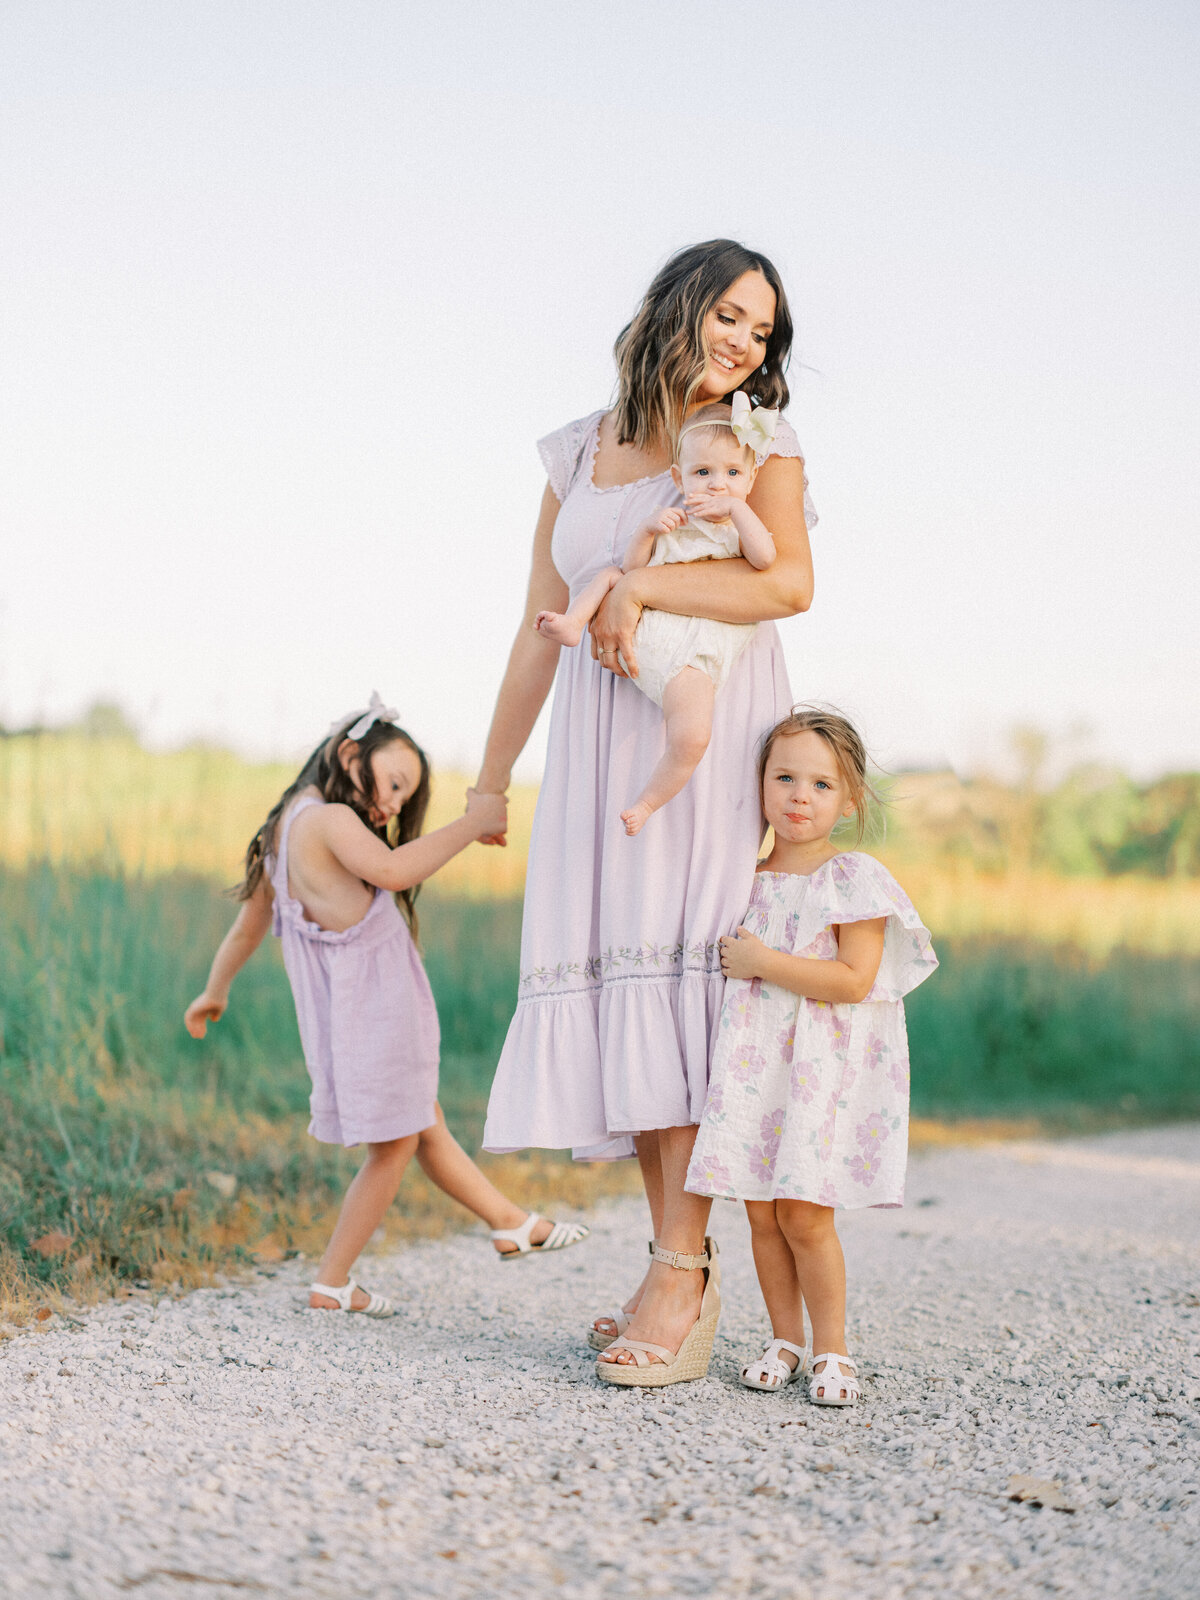 Jessica Blex - Midwest Family Photographer-6